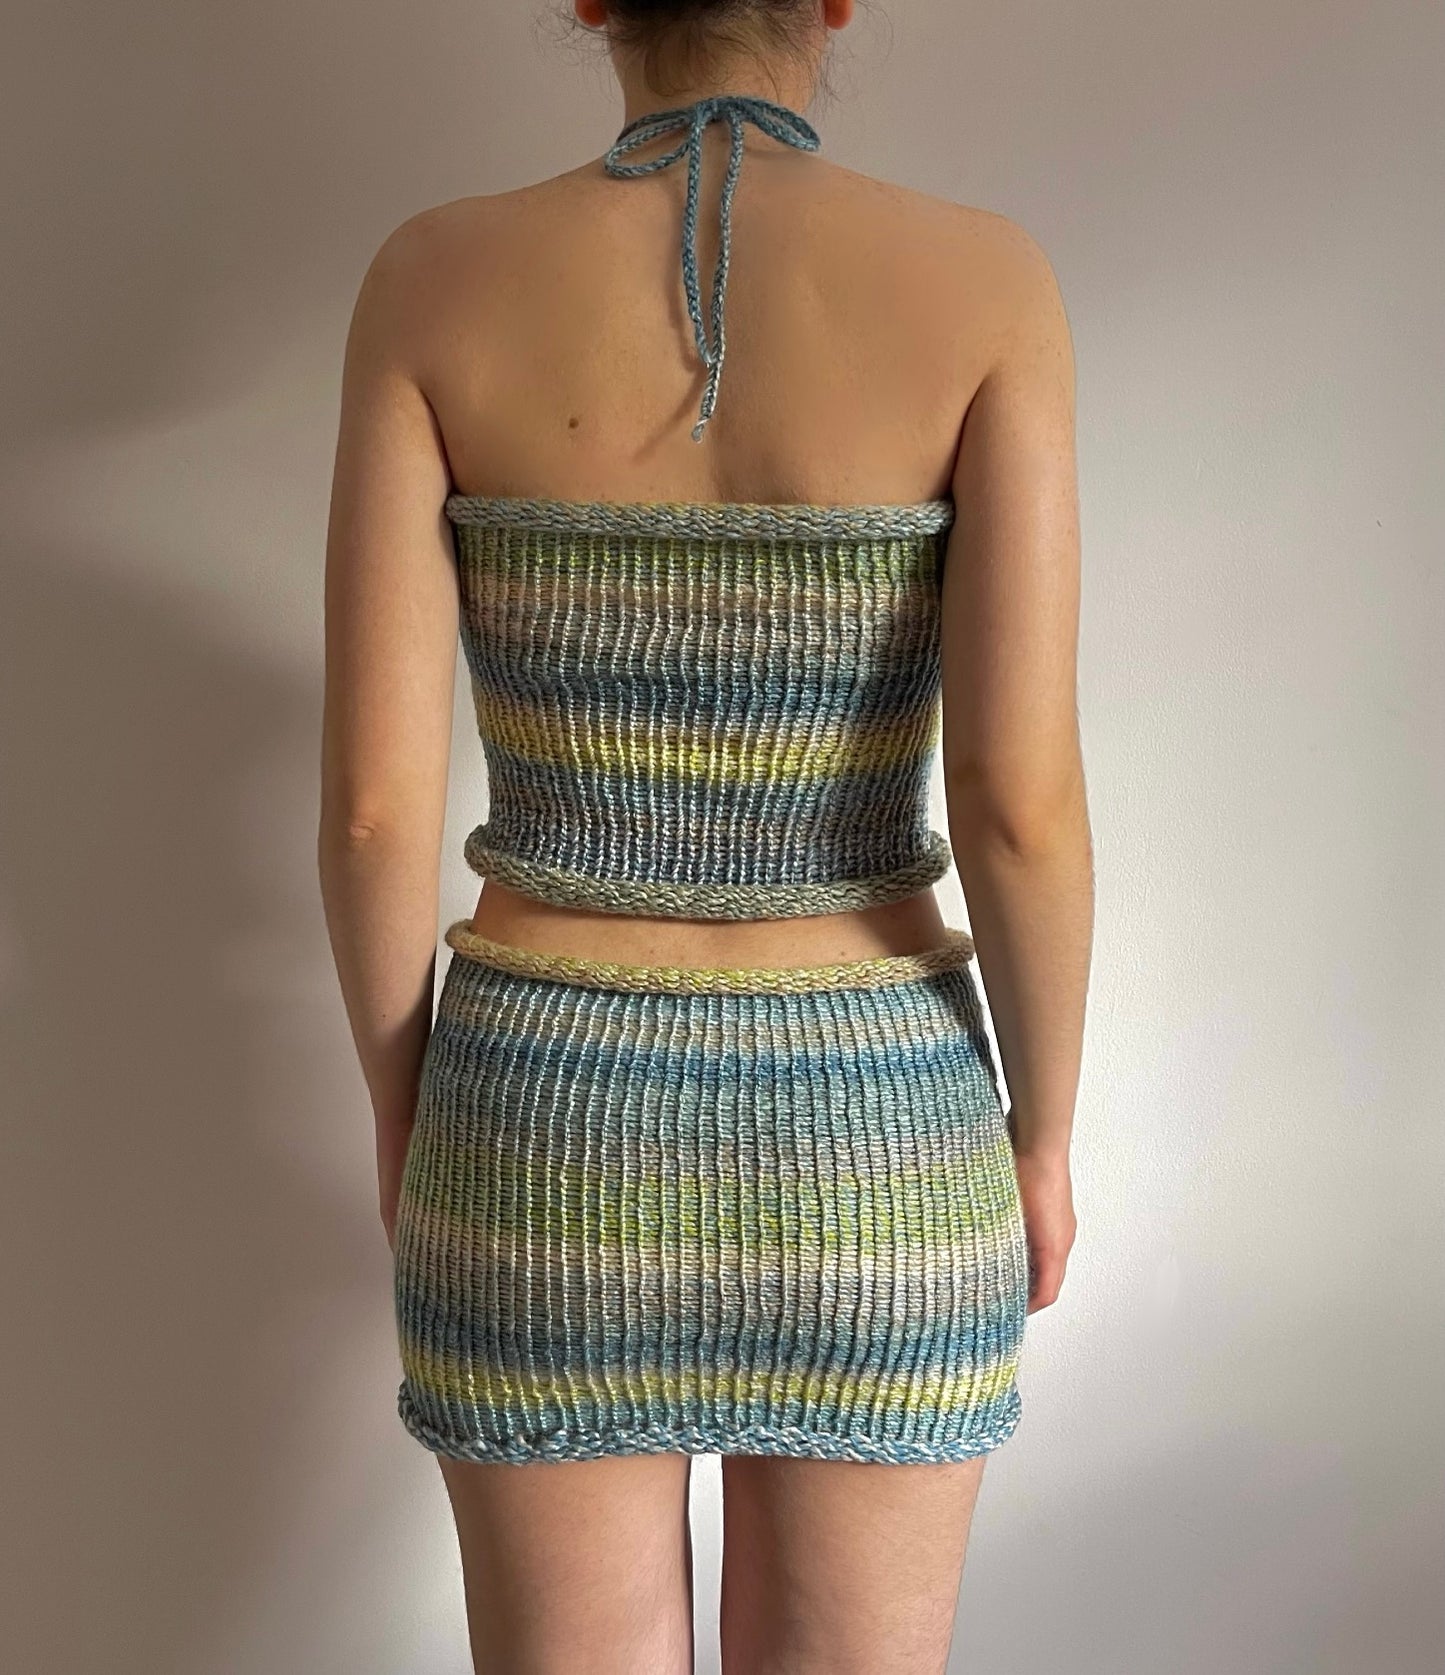 SET: Handmade knitted halter top and skirt in green, beige, yellow and blue